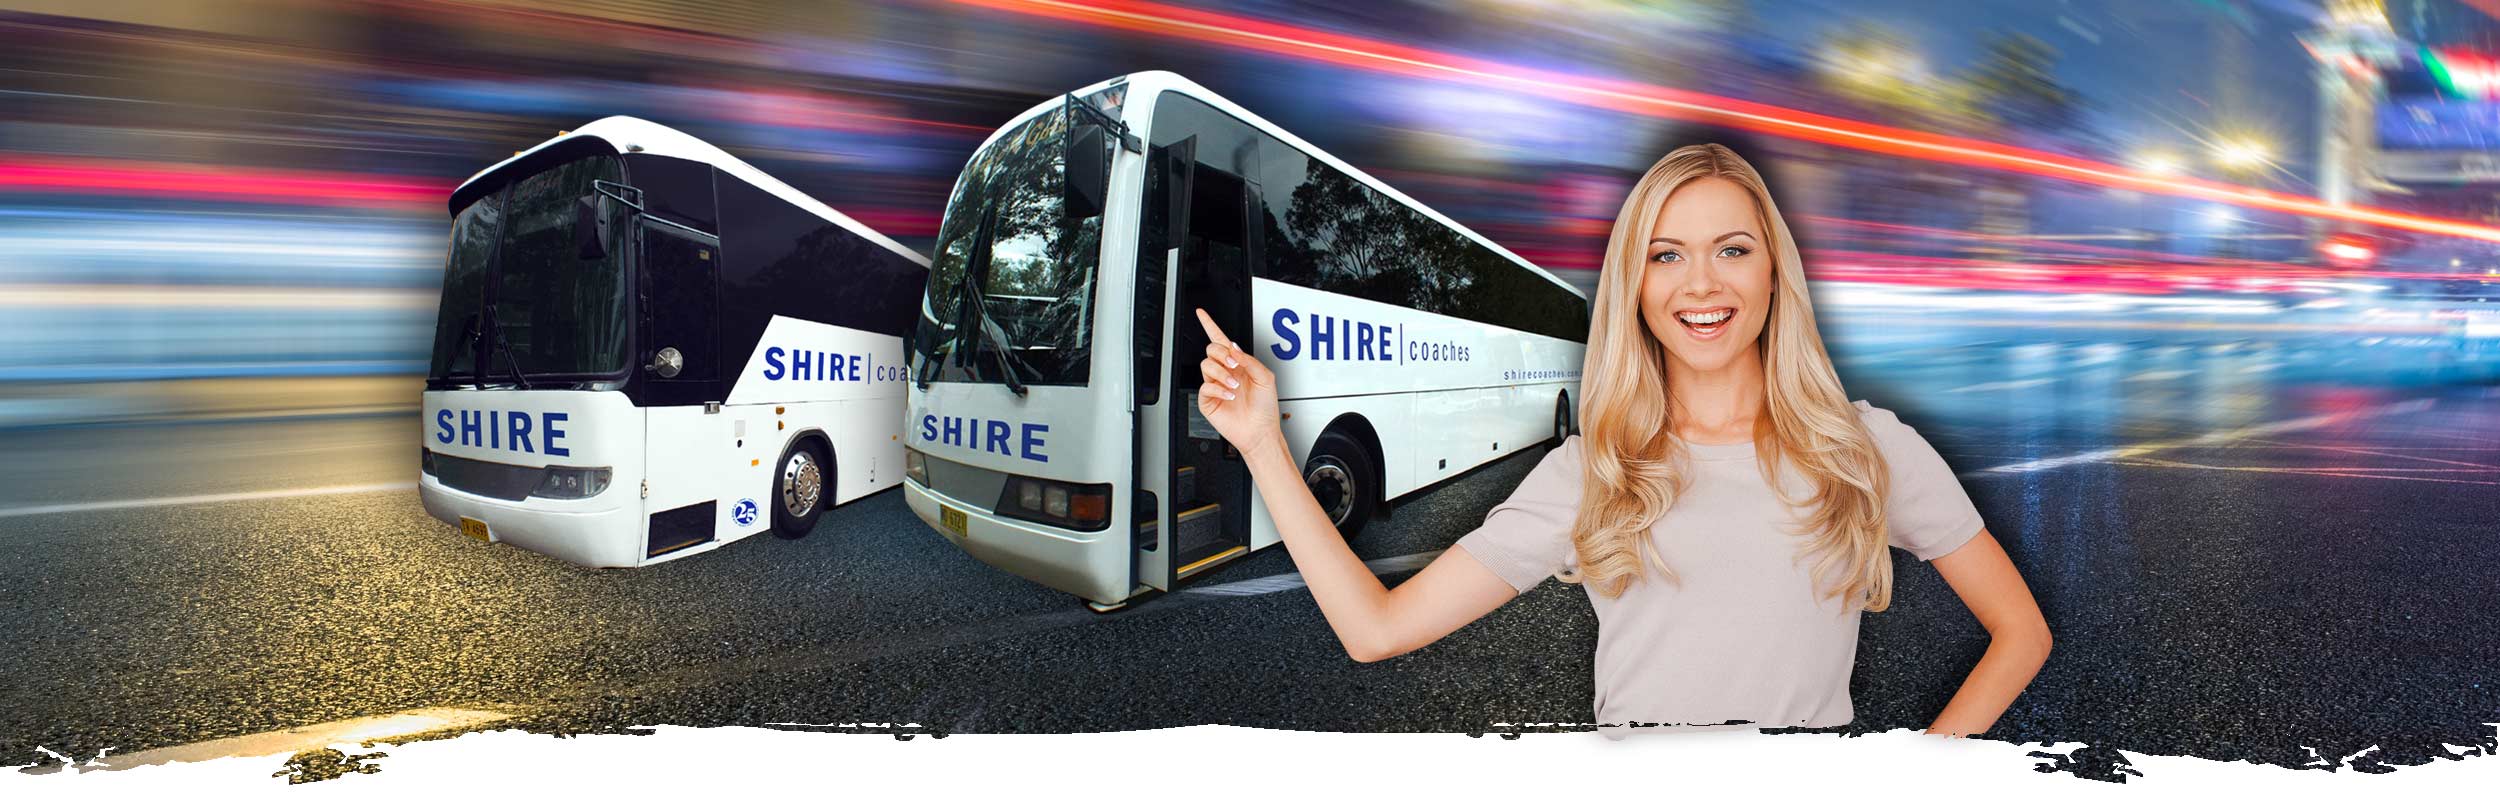 Shire coaches services hero image